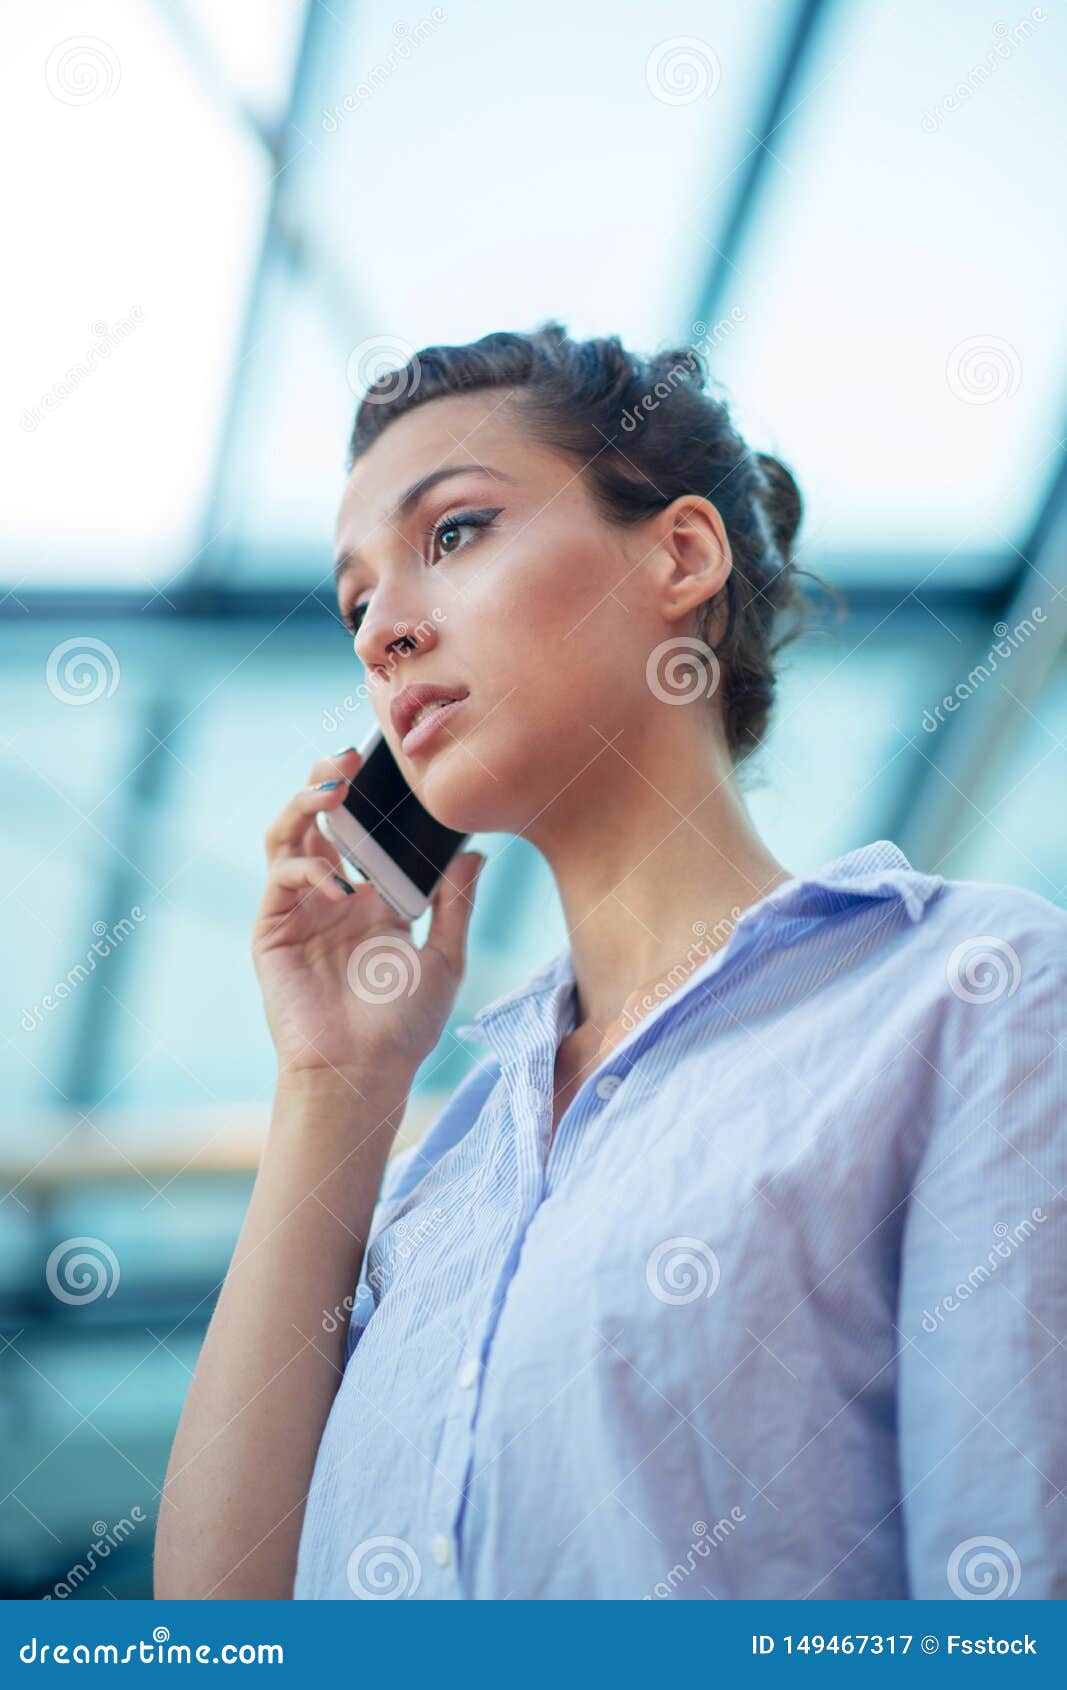 Gorgeous Woman Talking on Mobile Phone at Airport Stock Image - Image ...